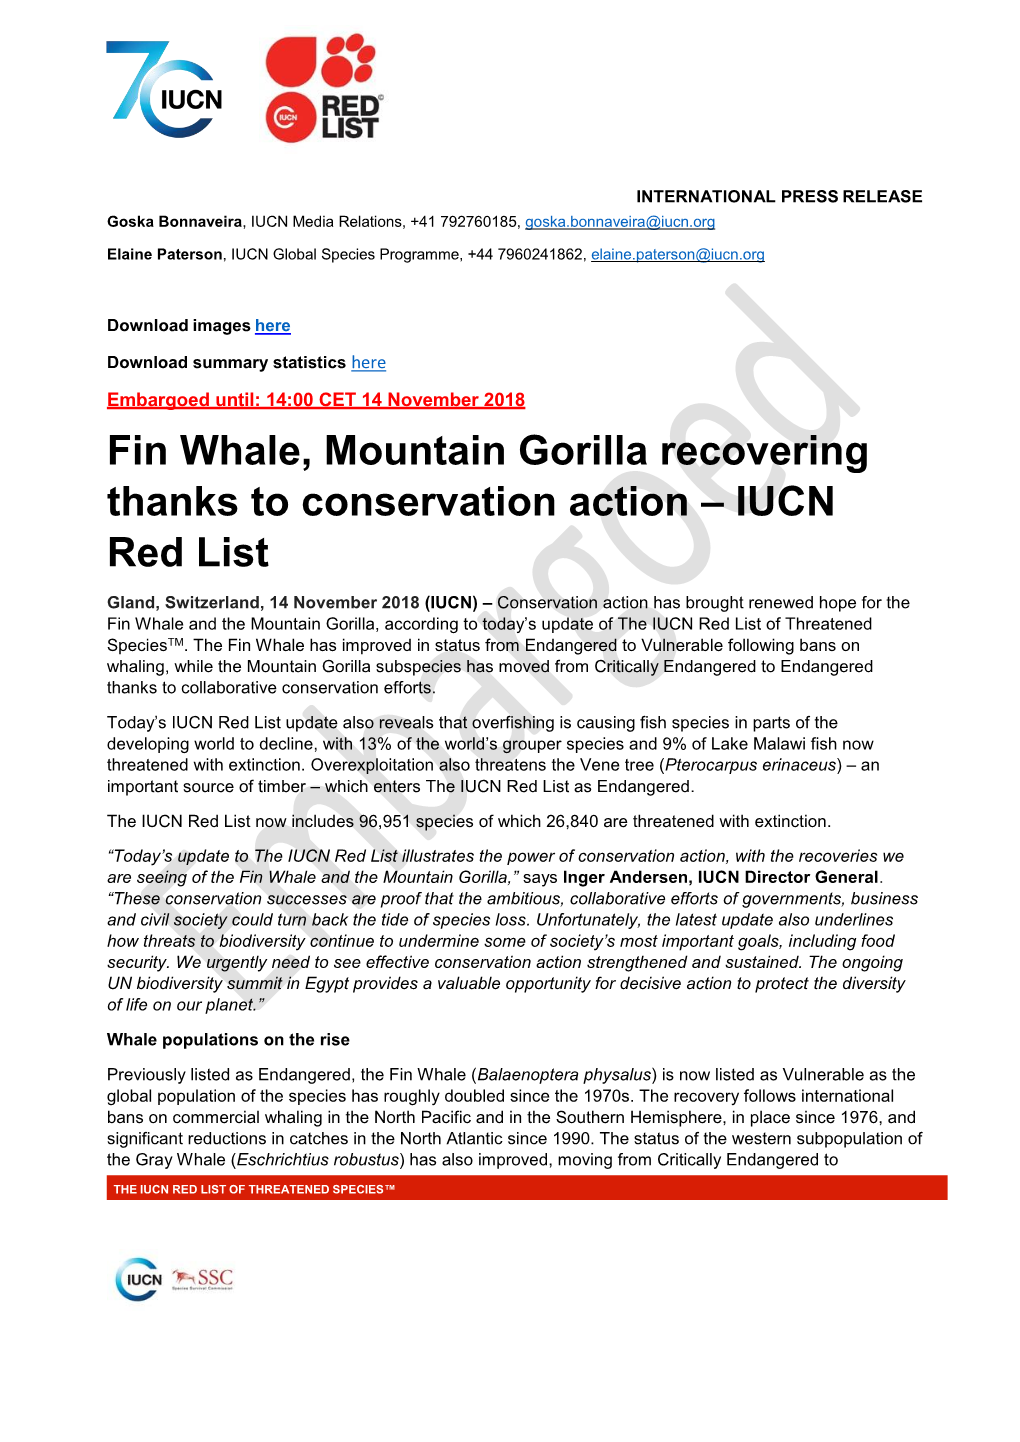 Fin Whale, Mountain Gorilla Recovering Thanks to Conservation Action – IUCN Red List